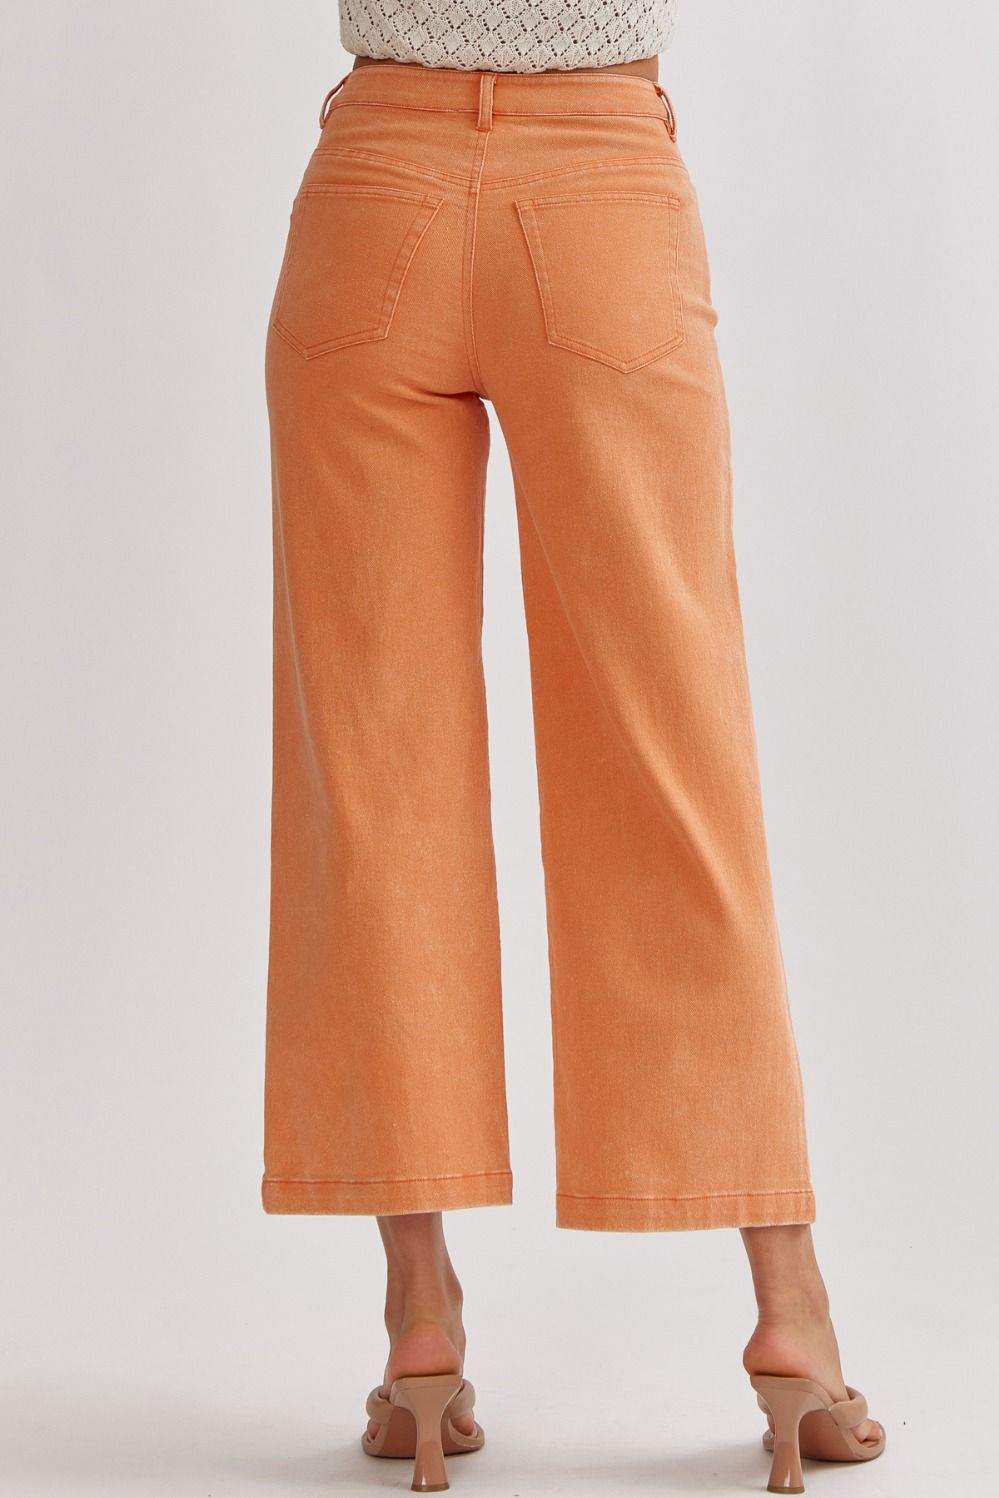 acid wash high waisted wide leg pants in tennessee orange-back view